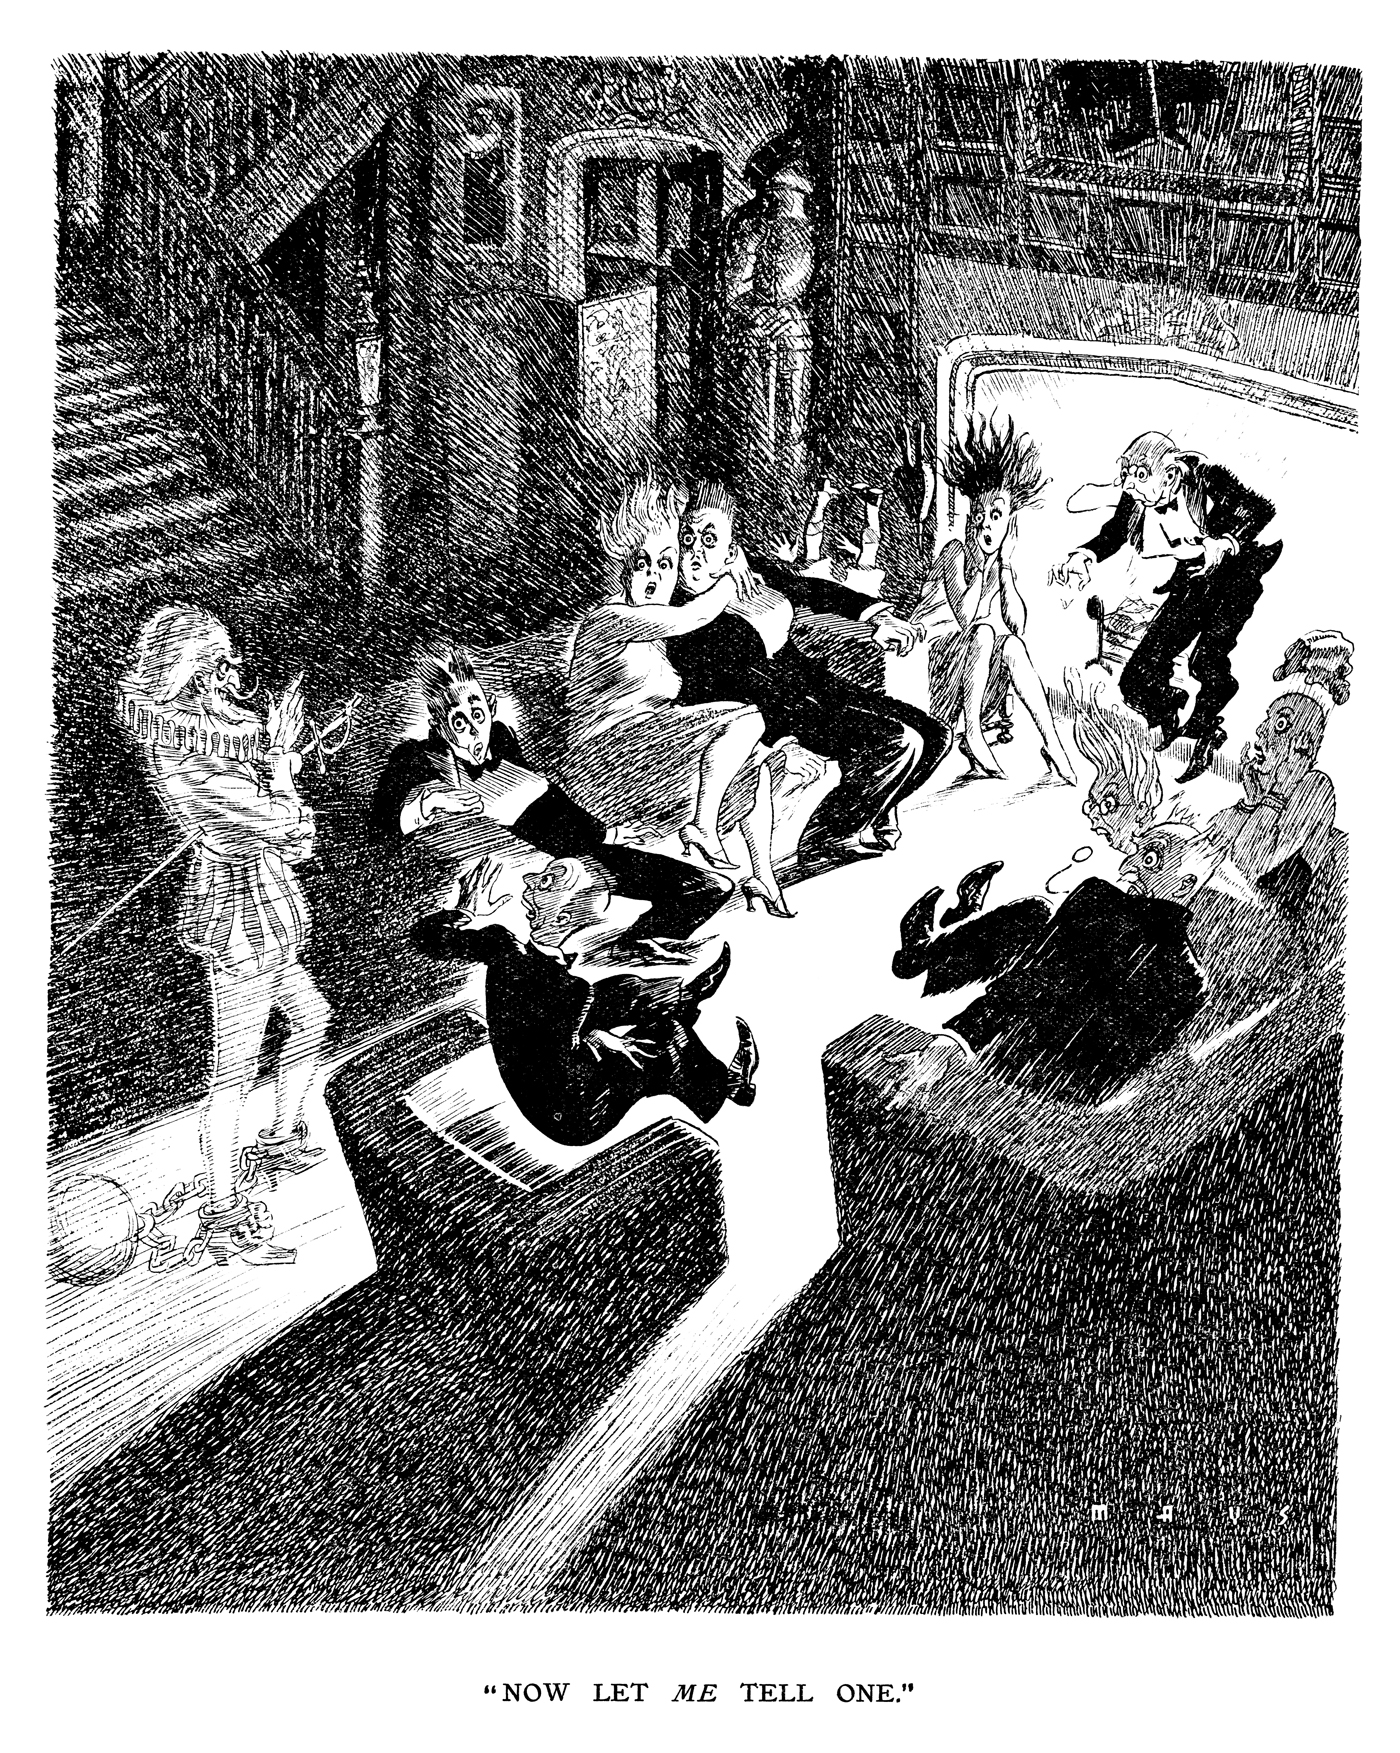 "Now let me tell one." Punch Almanack 1936. By Douglas Mays © Punch Ltd